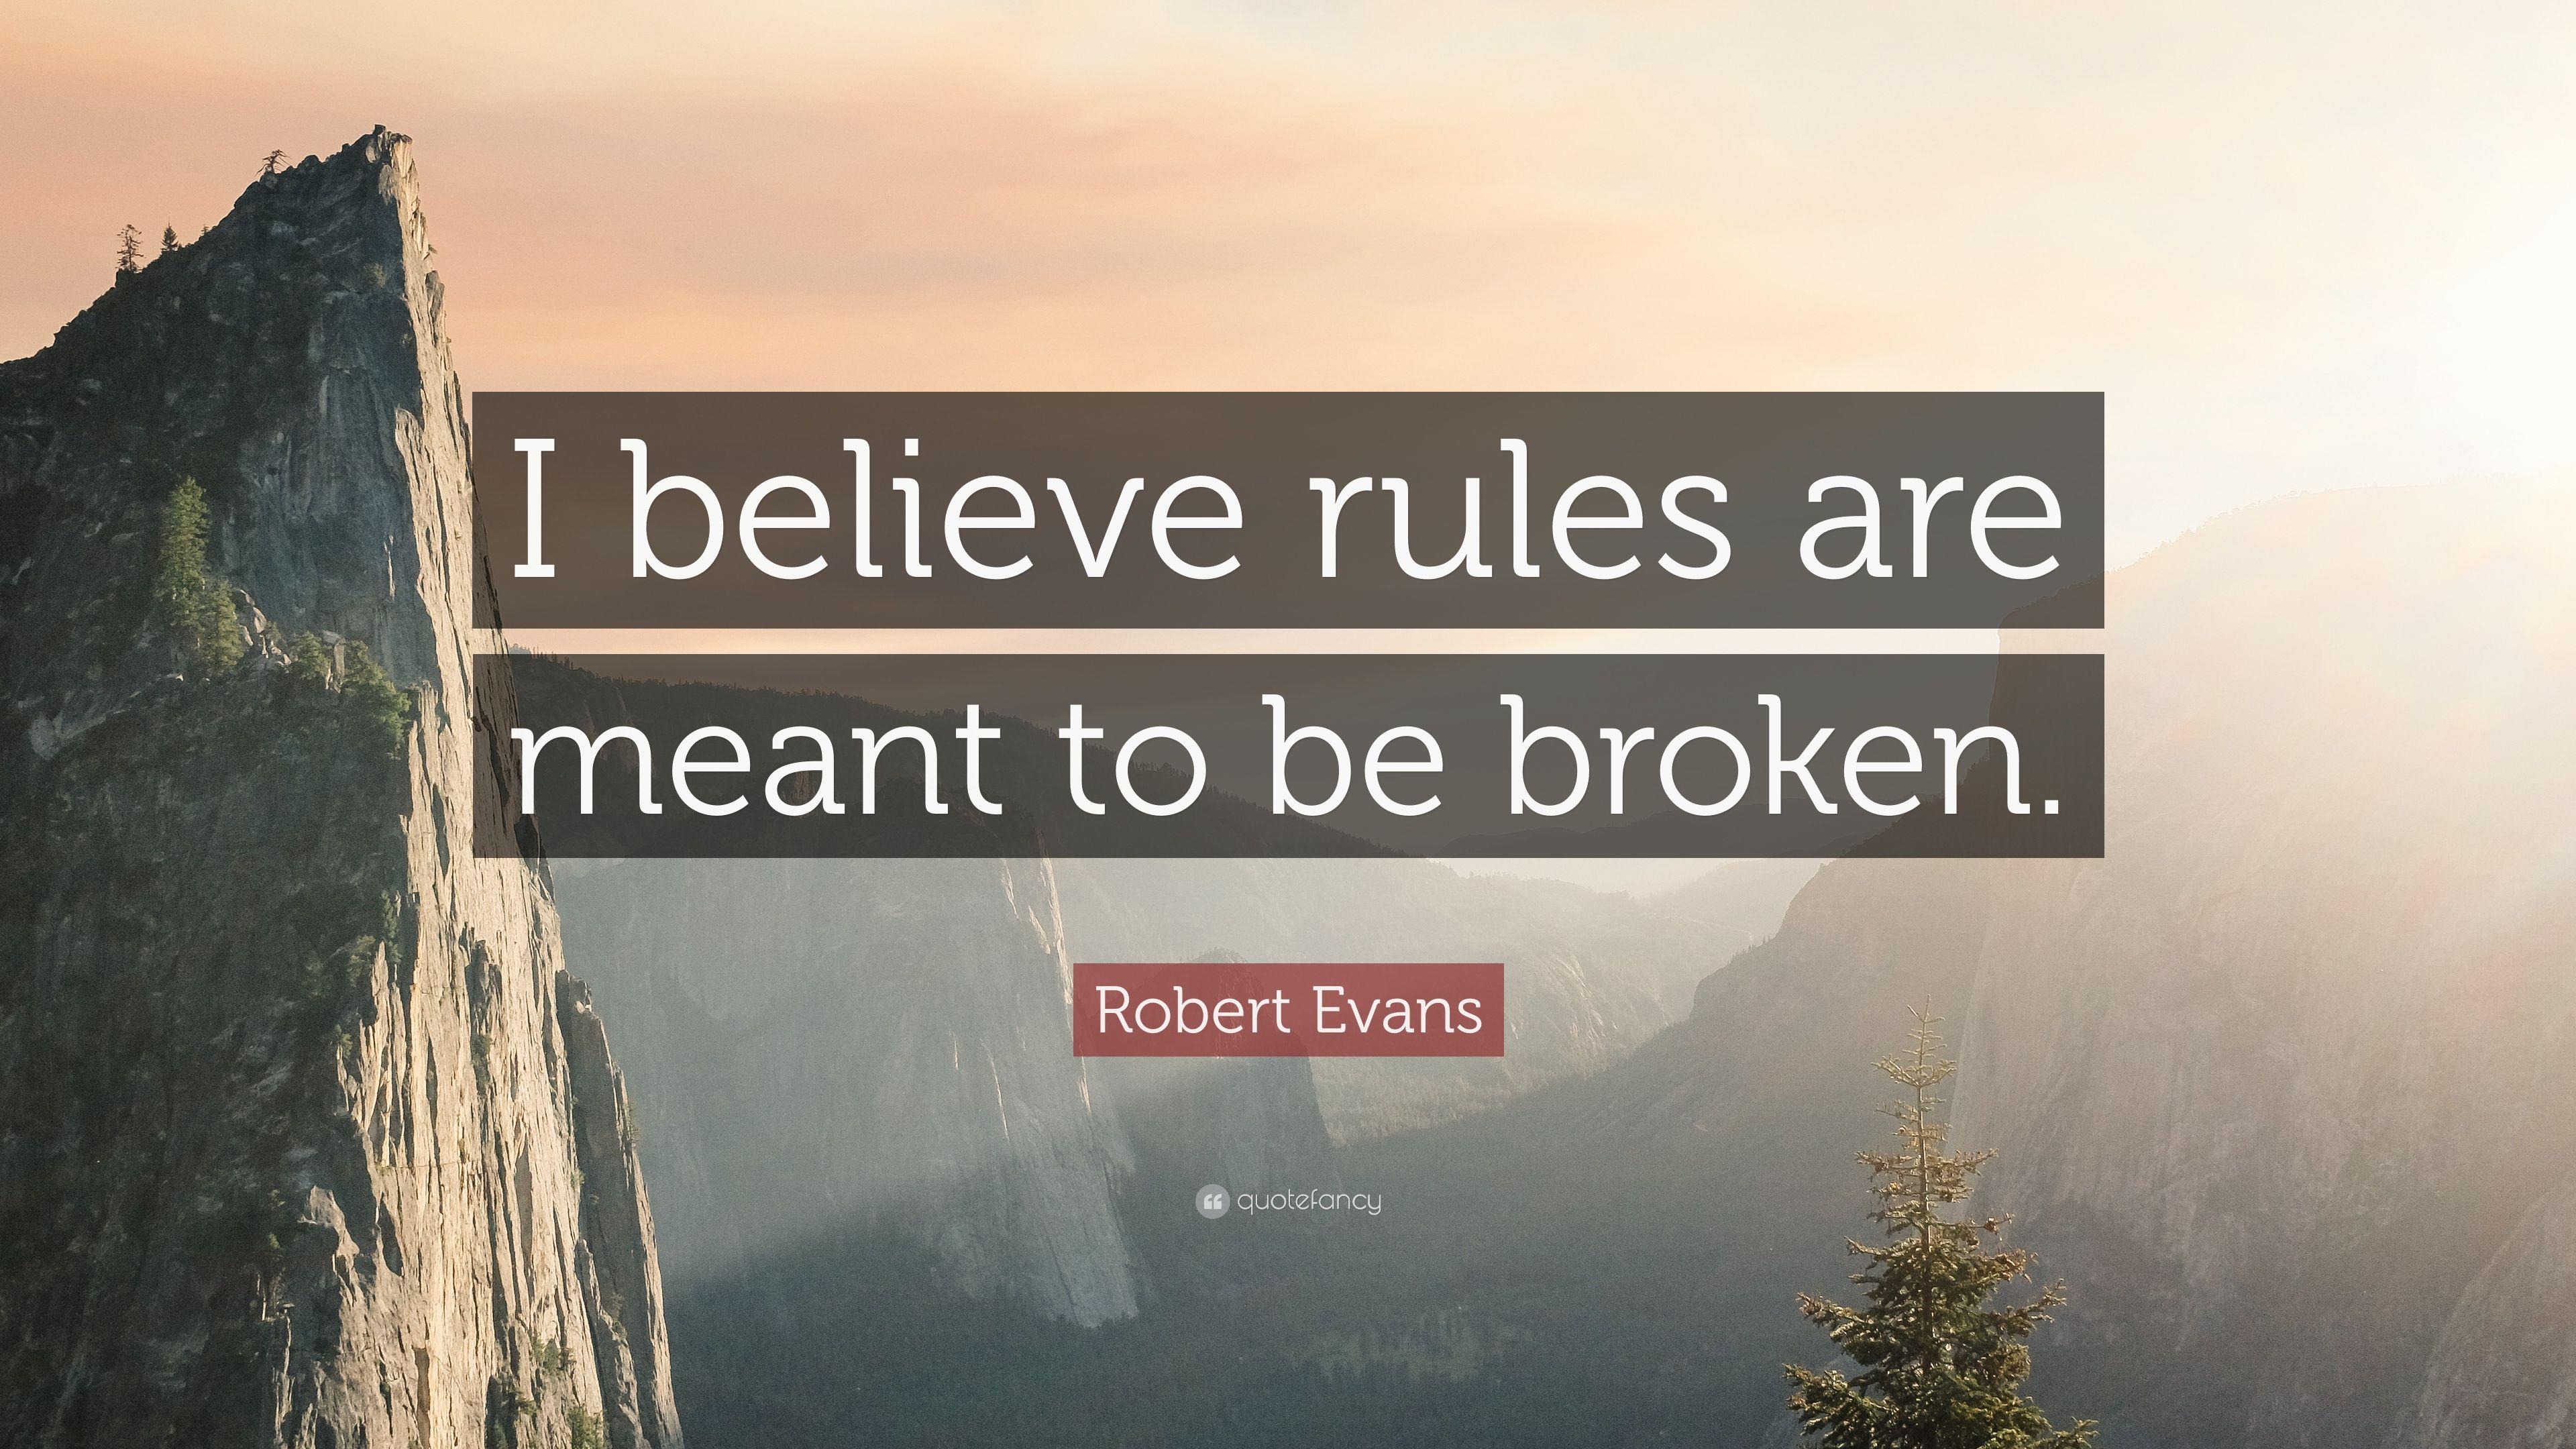 Robert Evans Quote: “I believe rules are meant to be broken.” 12